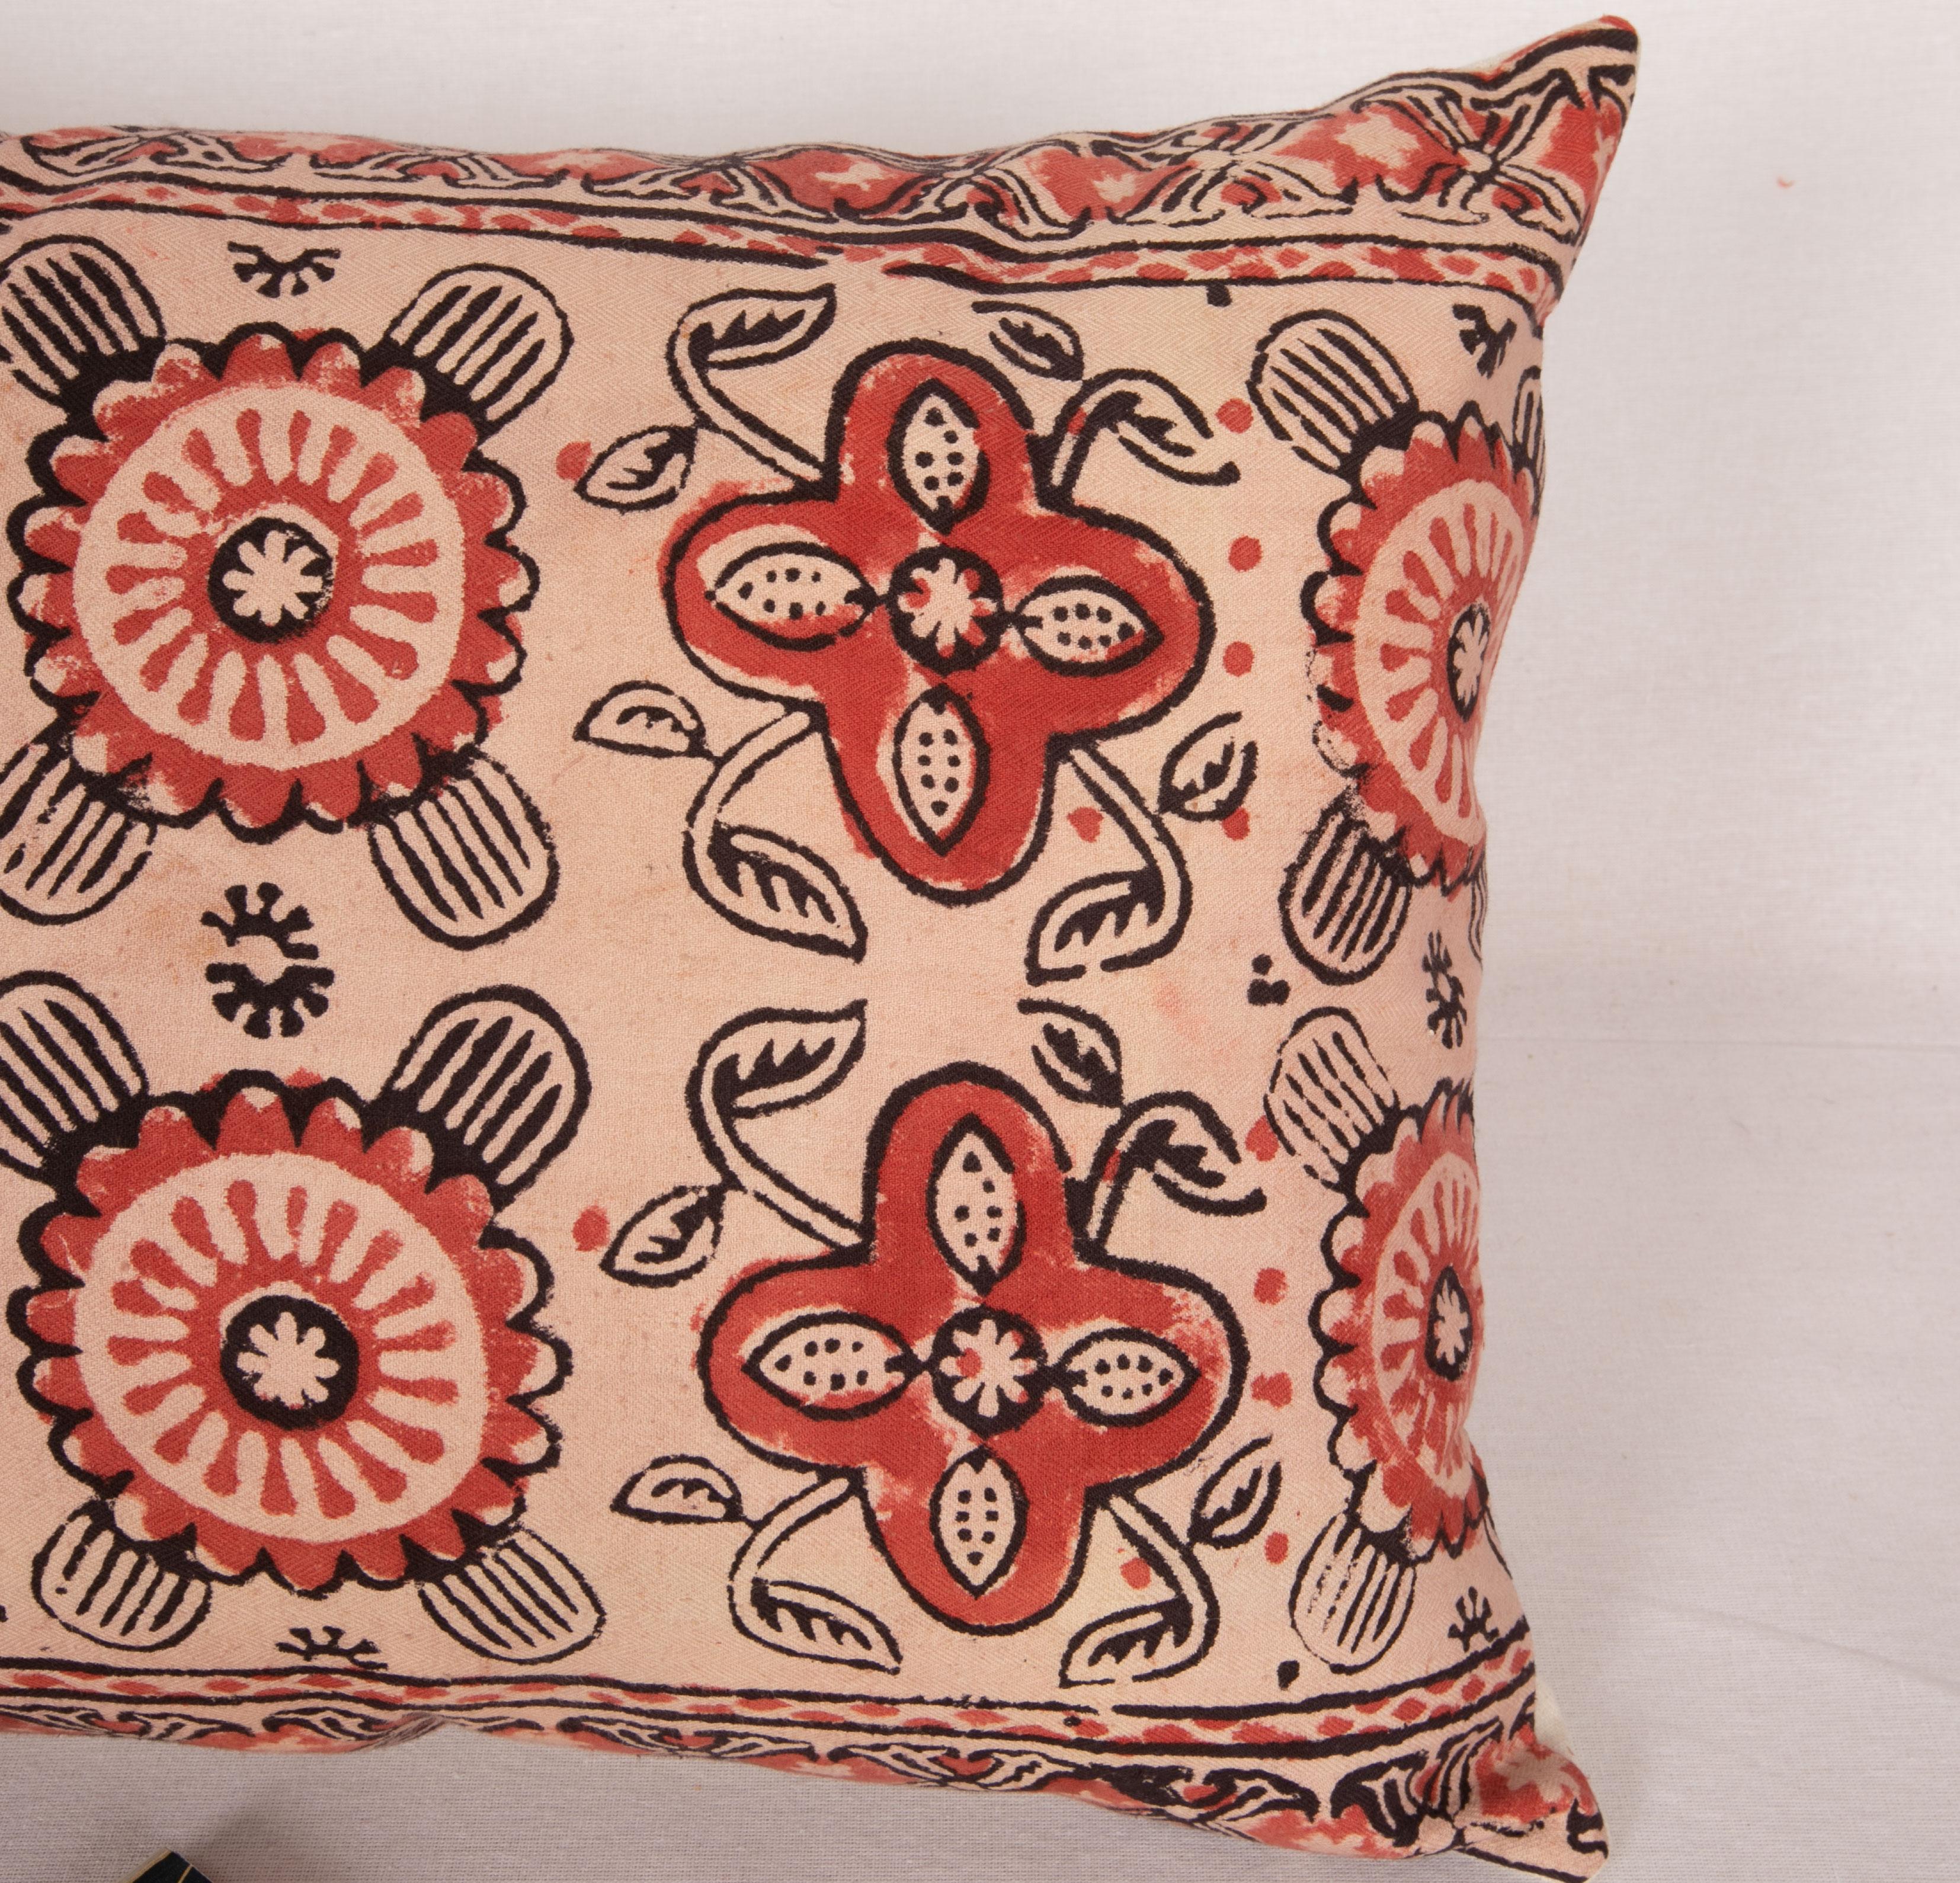 20th Century Pillow Case Made from an Uzbek Block Print, Early 20th C For Sale